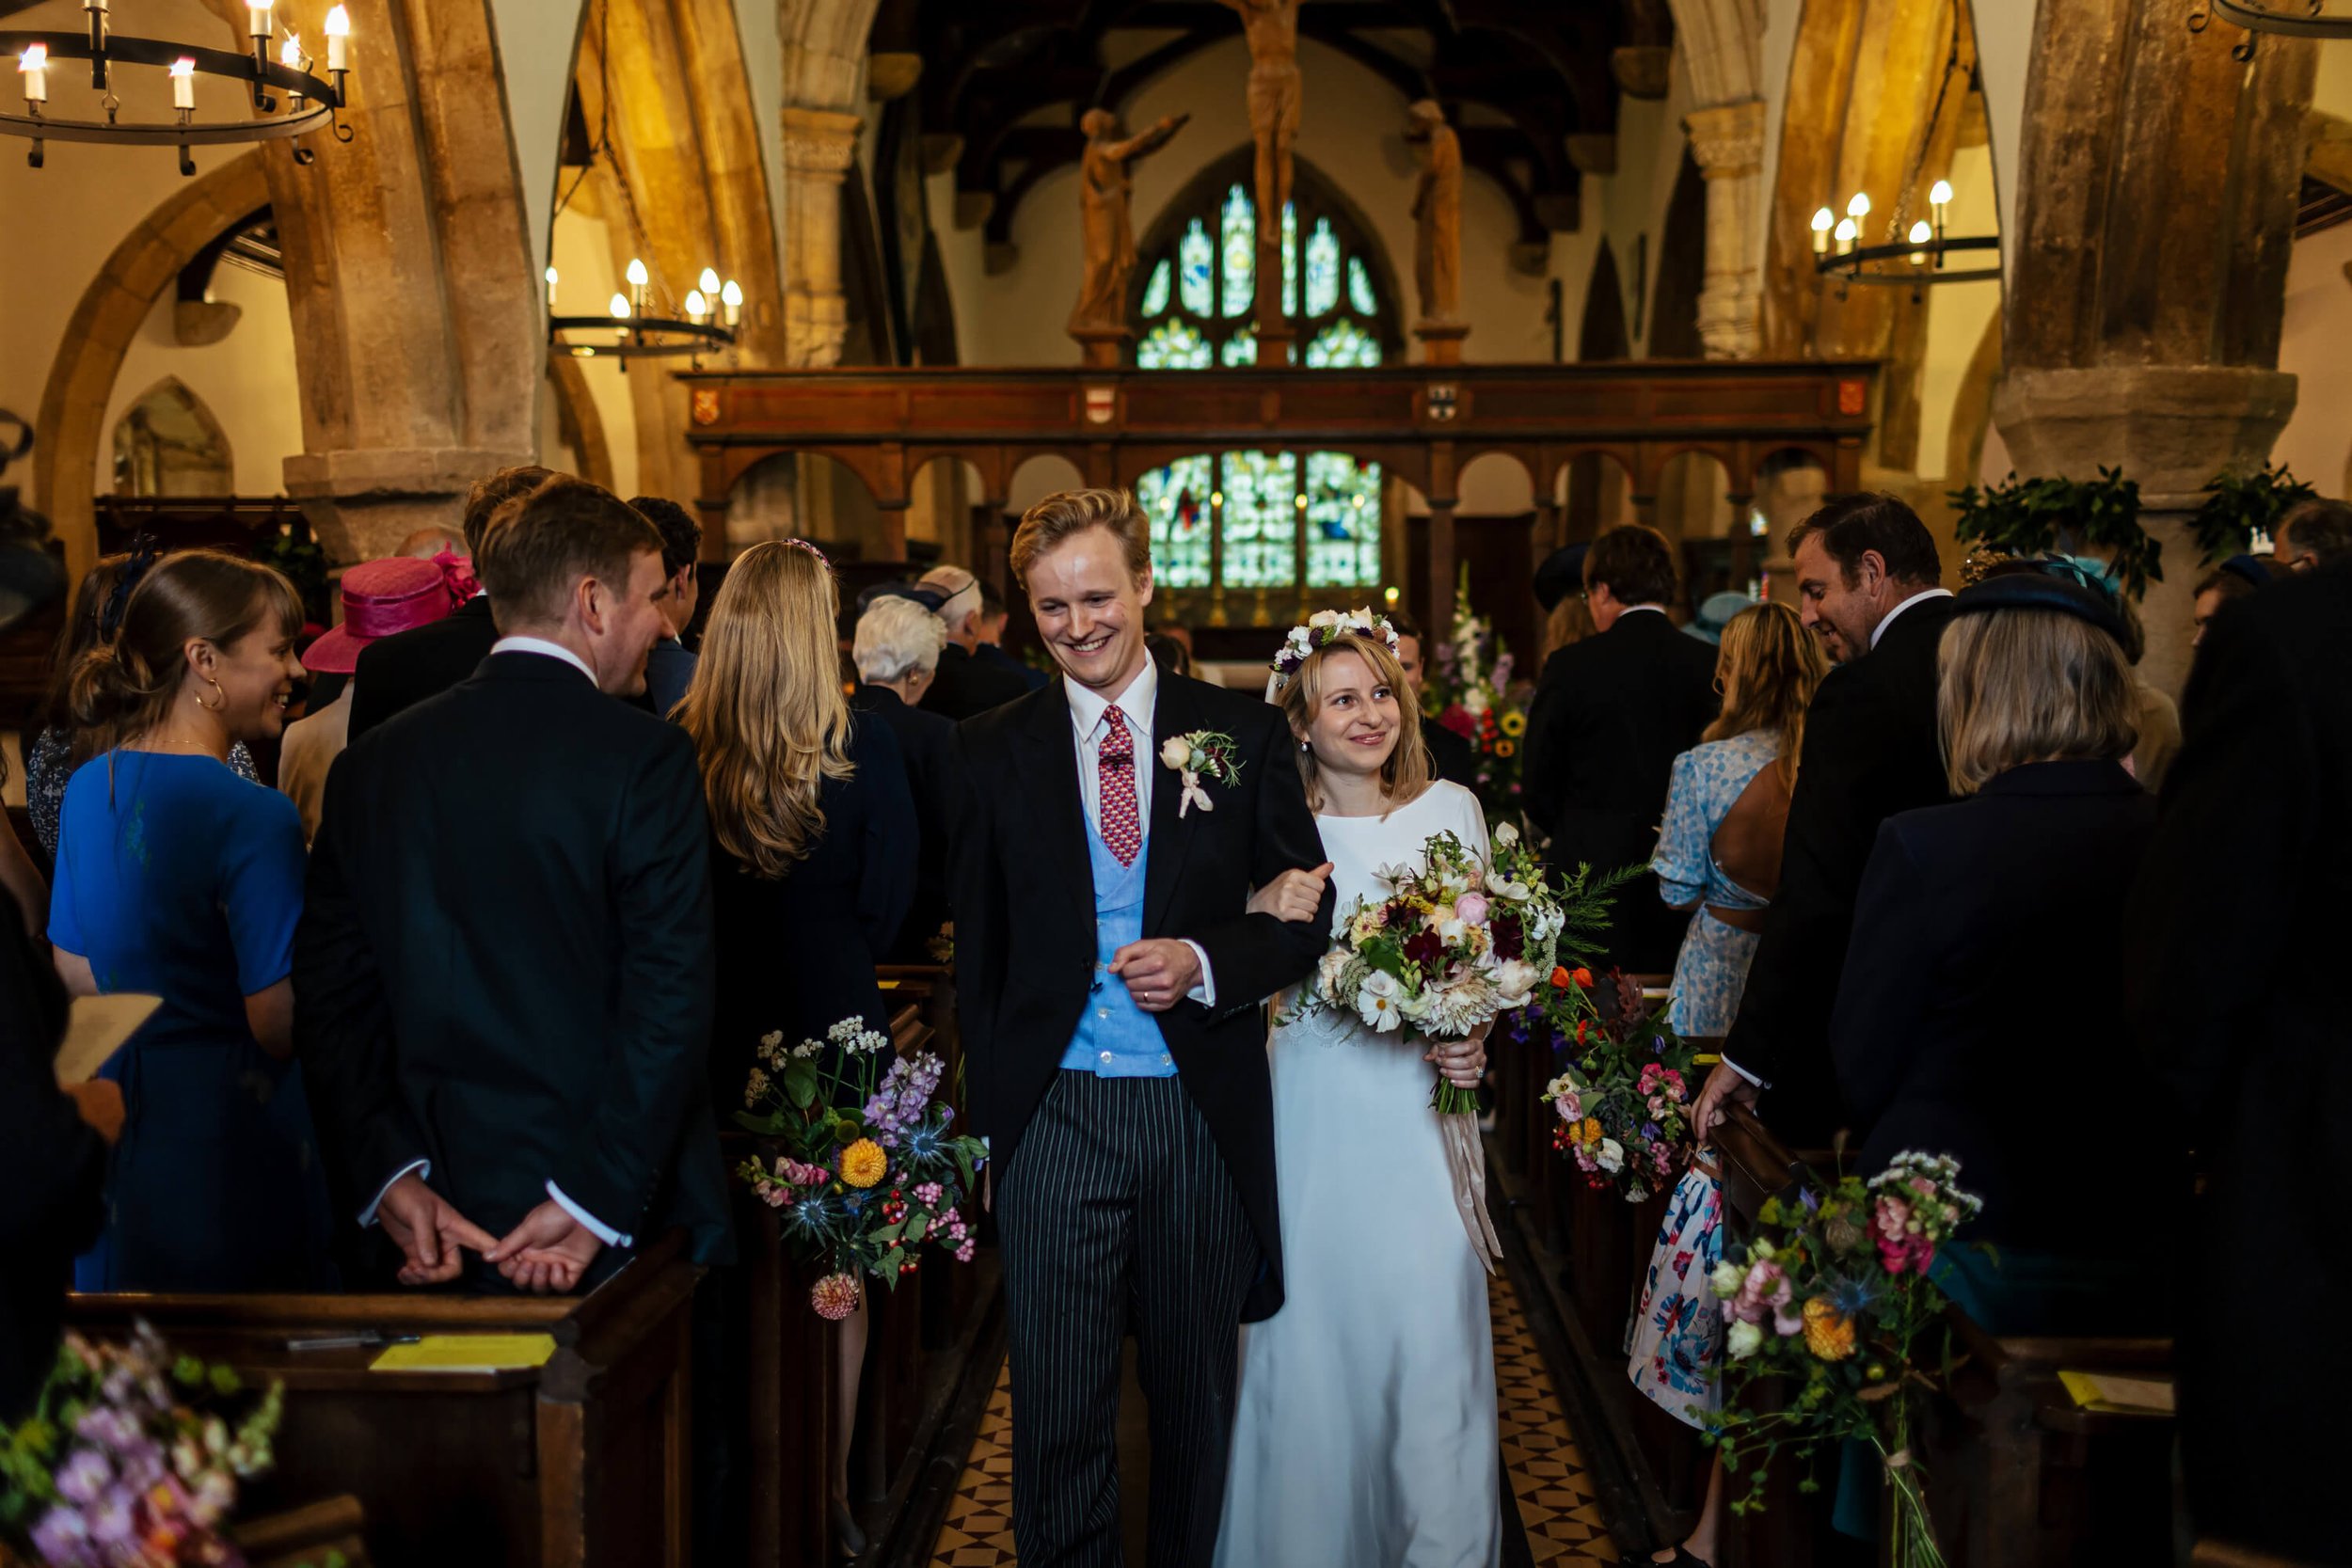 Walking down the aisle as husband and wife in Yorkshire